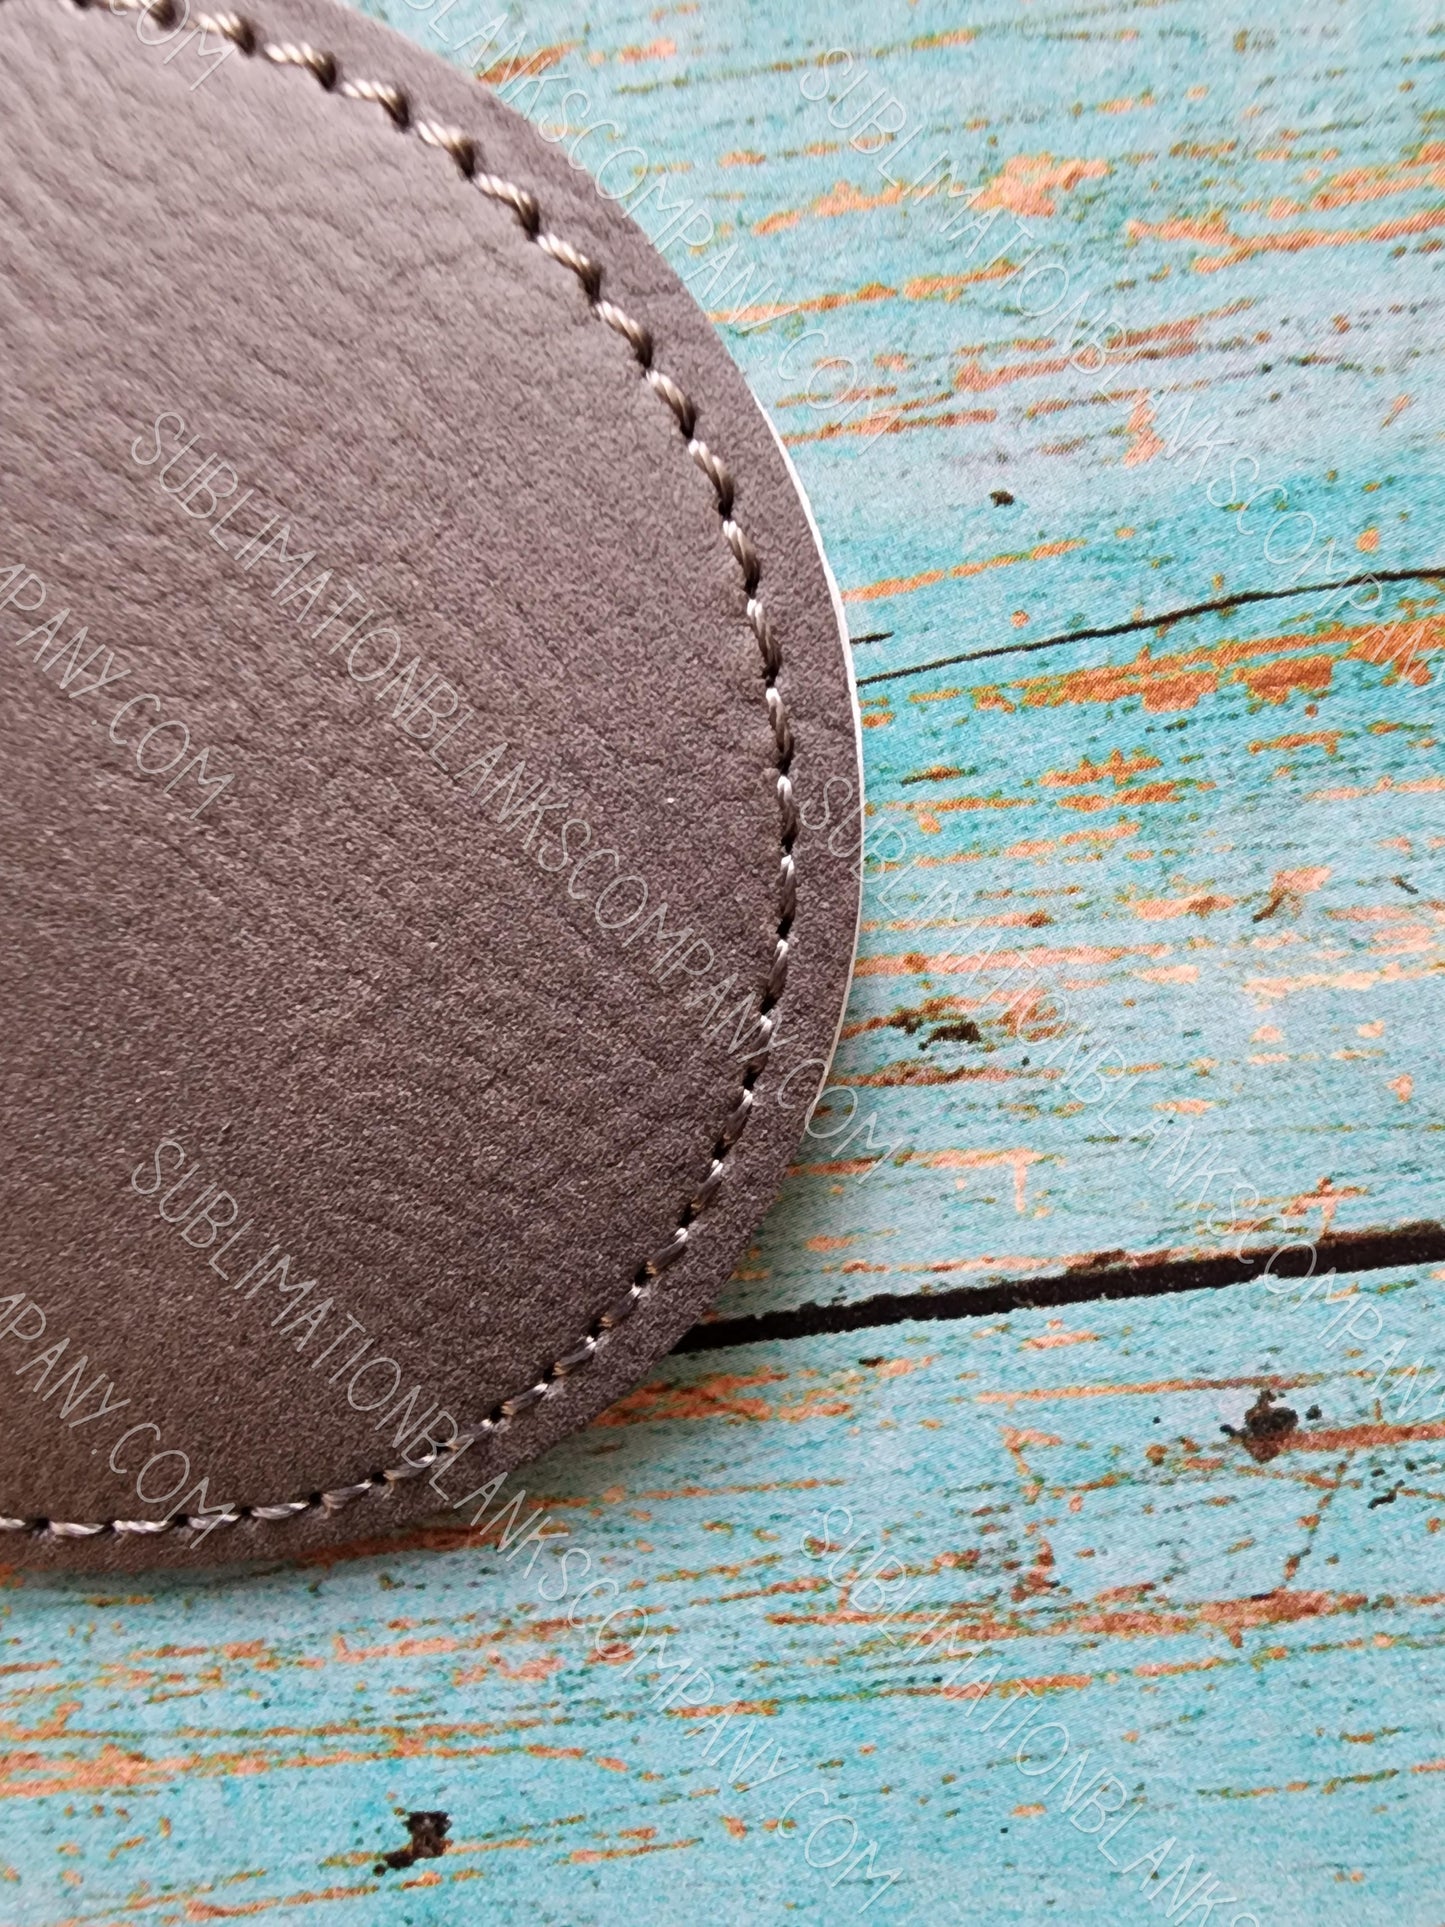 Vegan Stitched Faux Leather 2.5" Round Hat Patch Blank! Laserable!